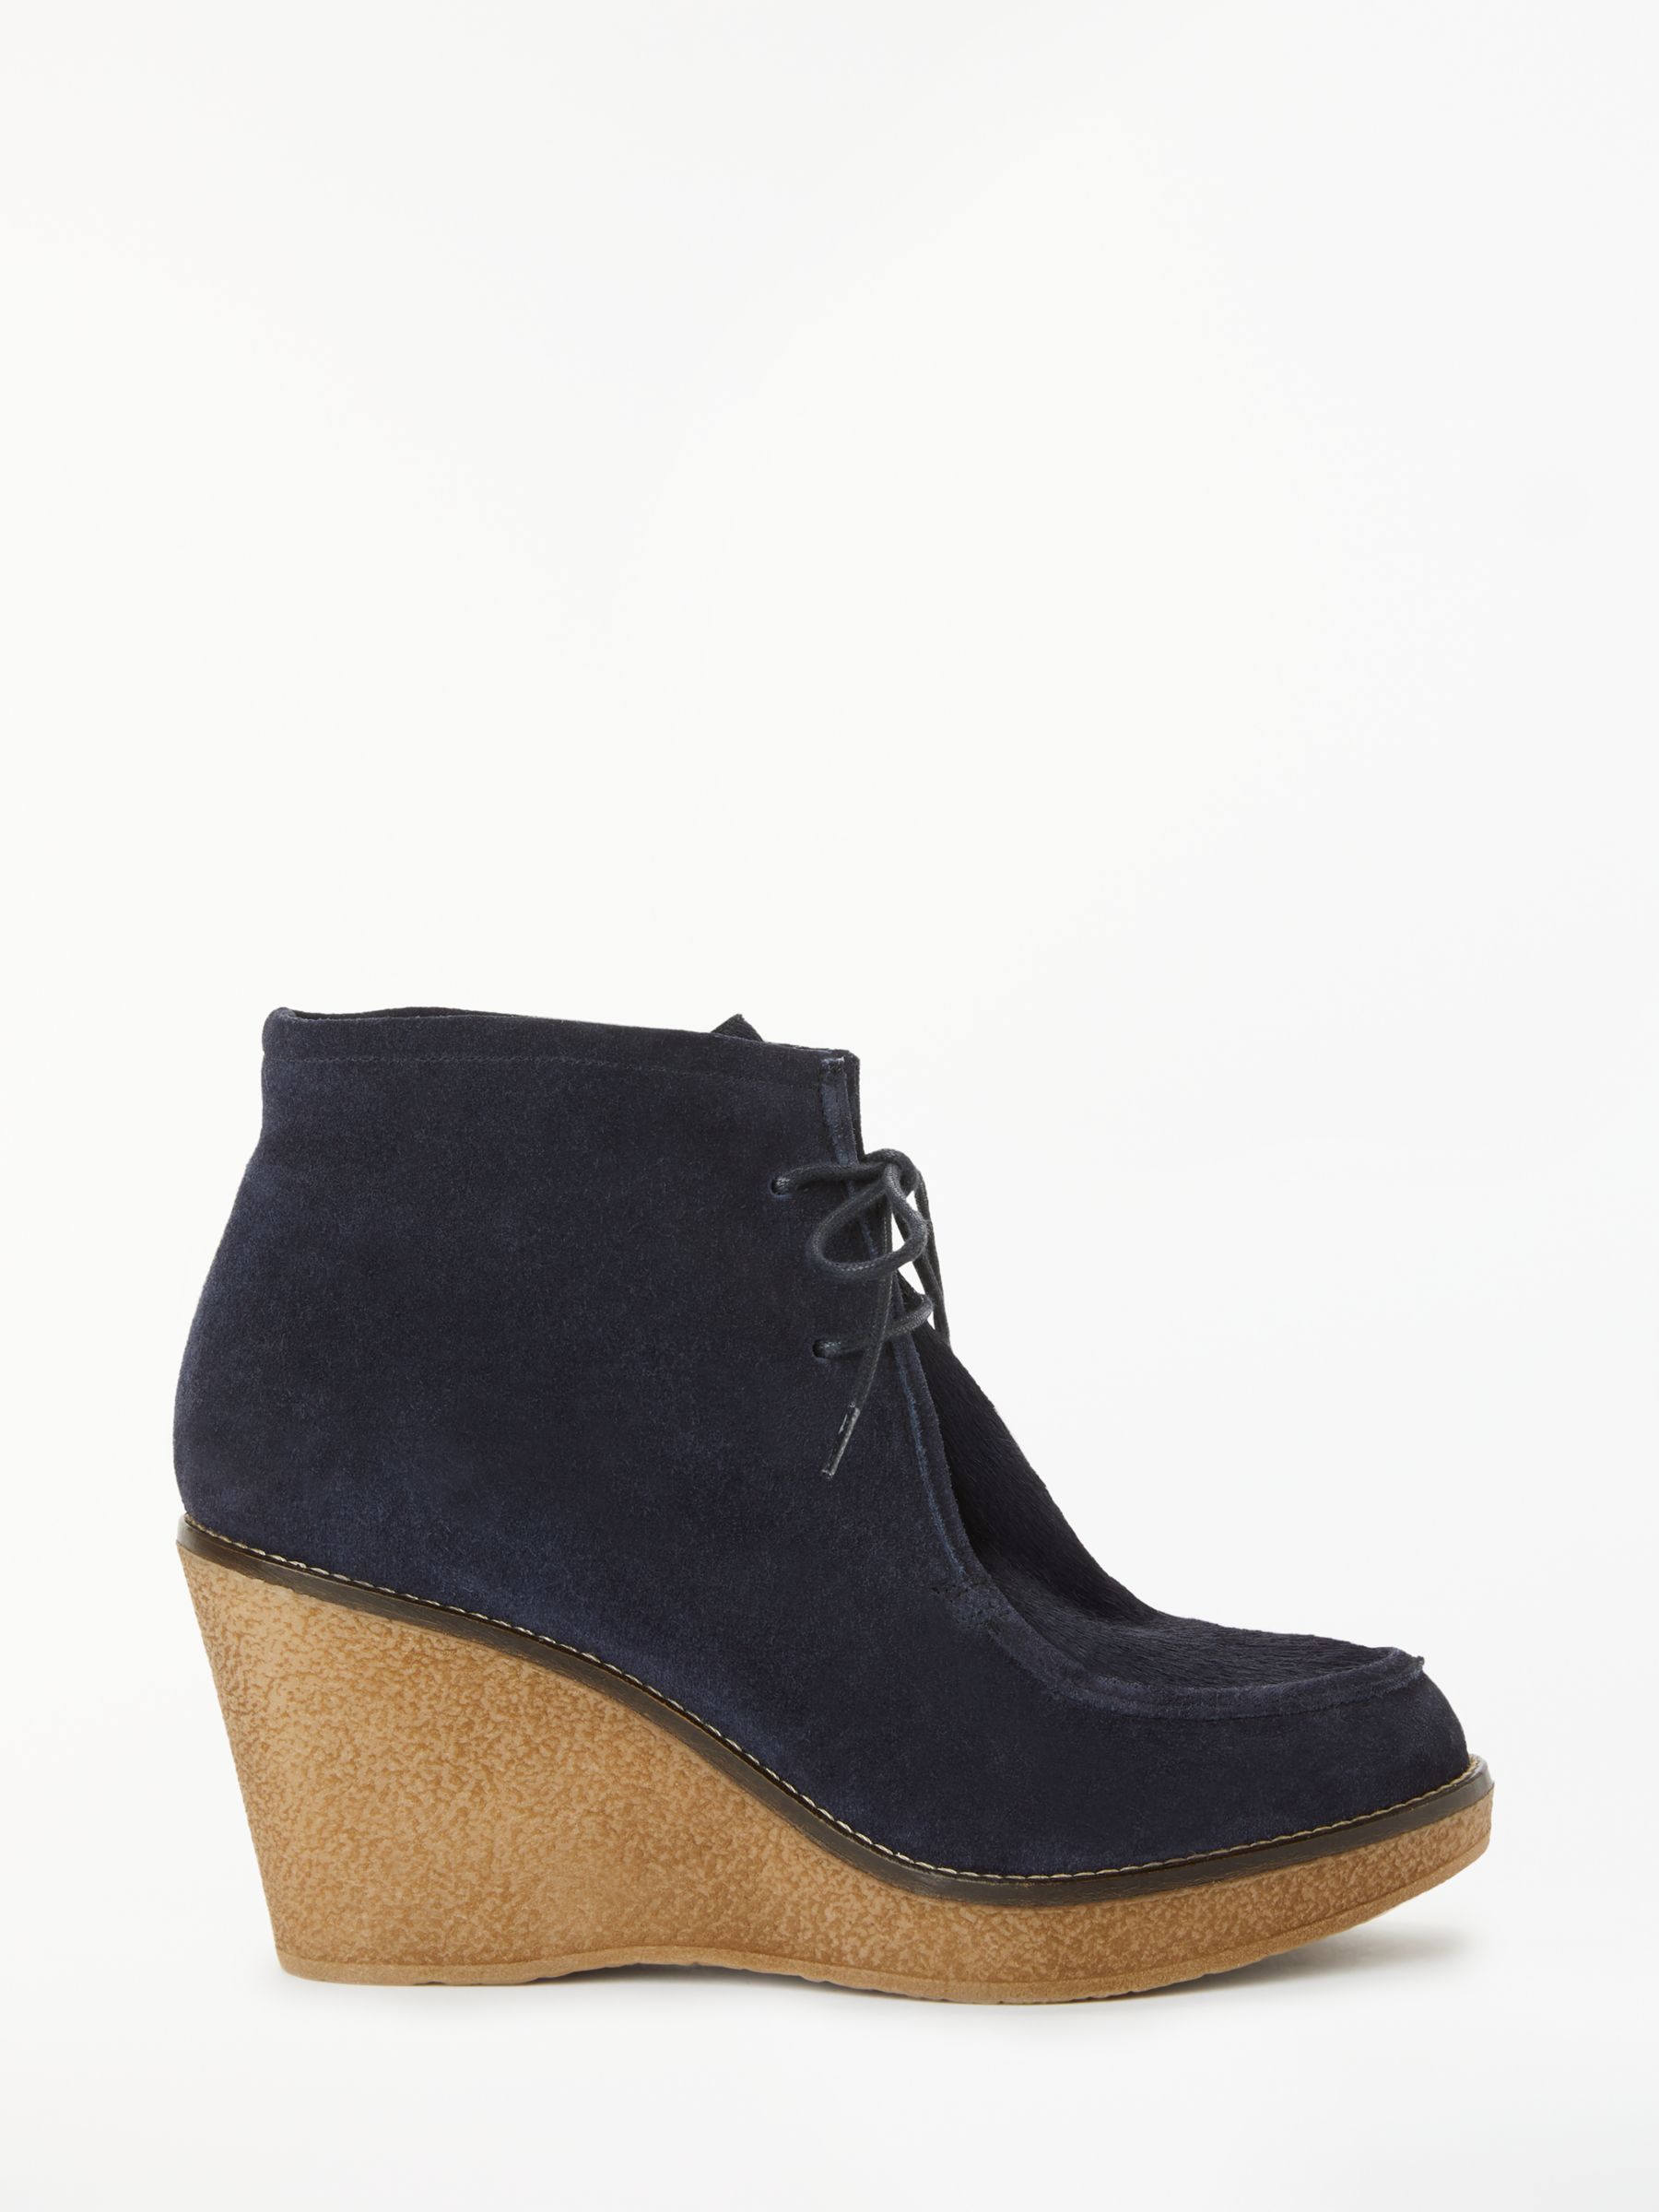 navy wedge ankle boots